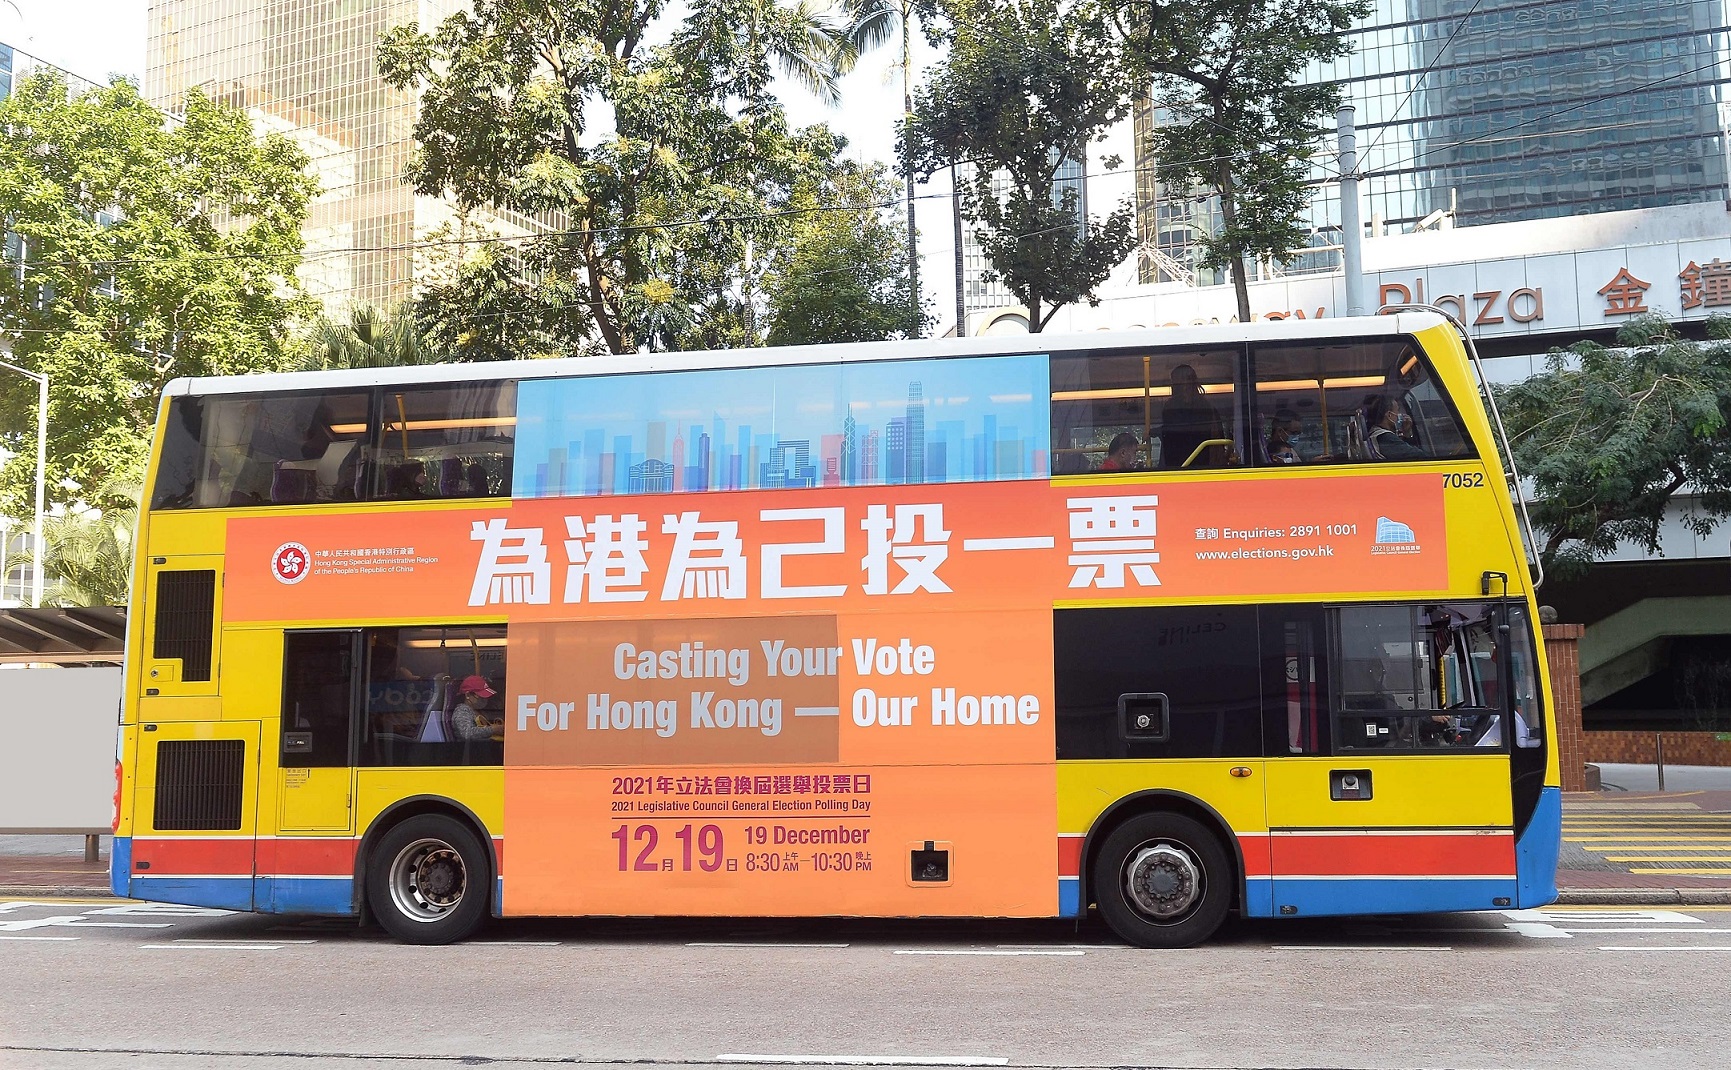 Casting Your Vote For Hong Kong - Our Home